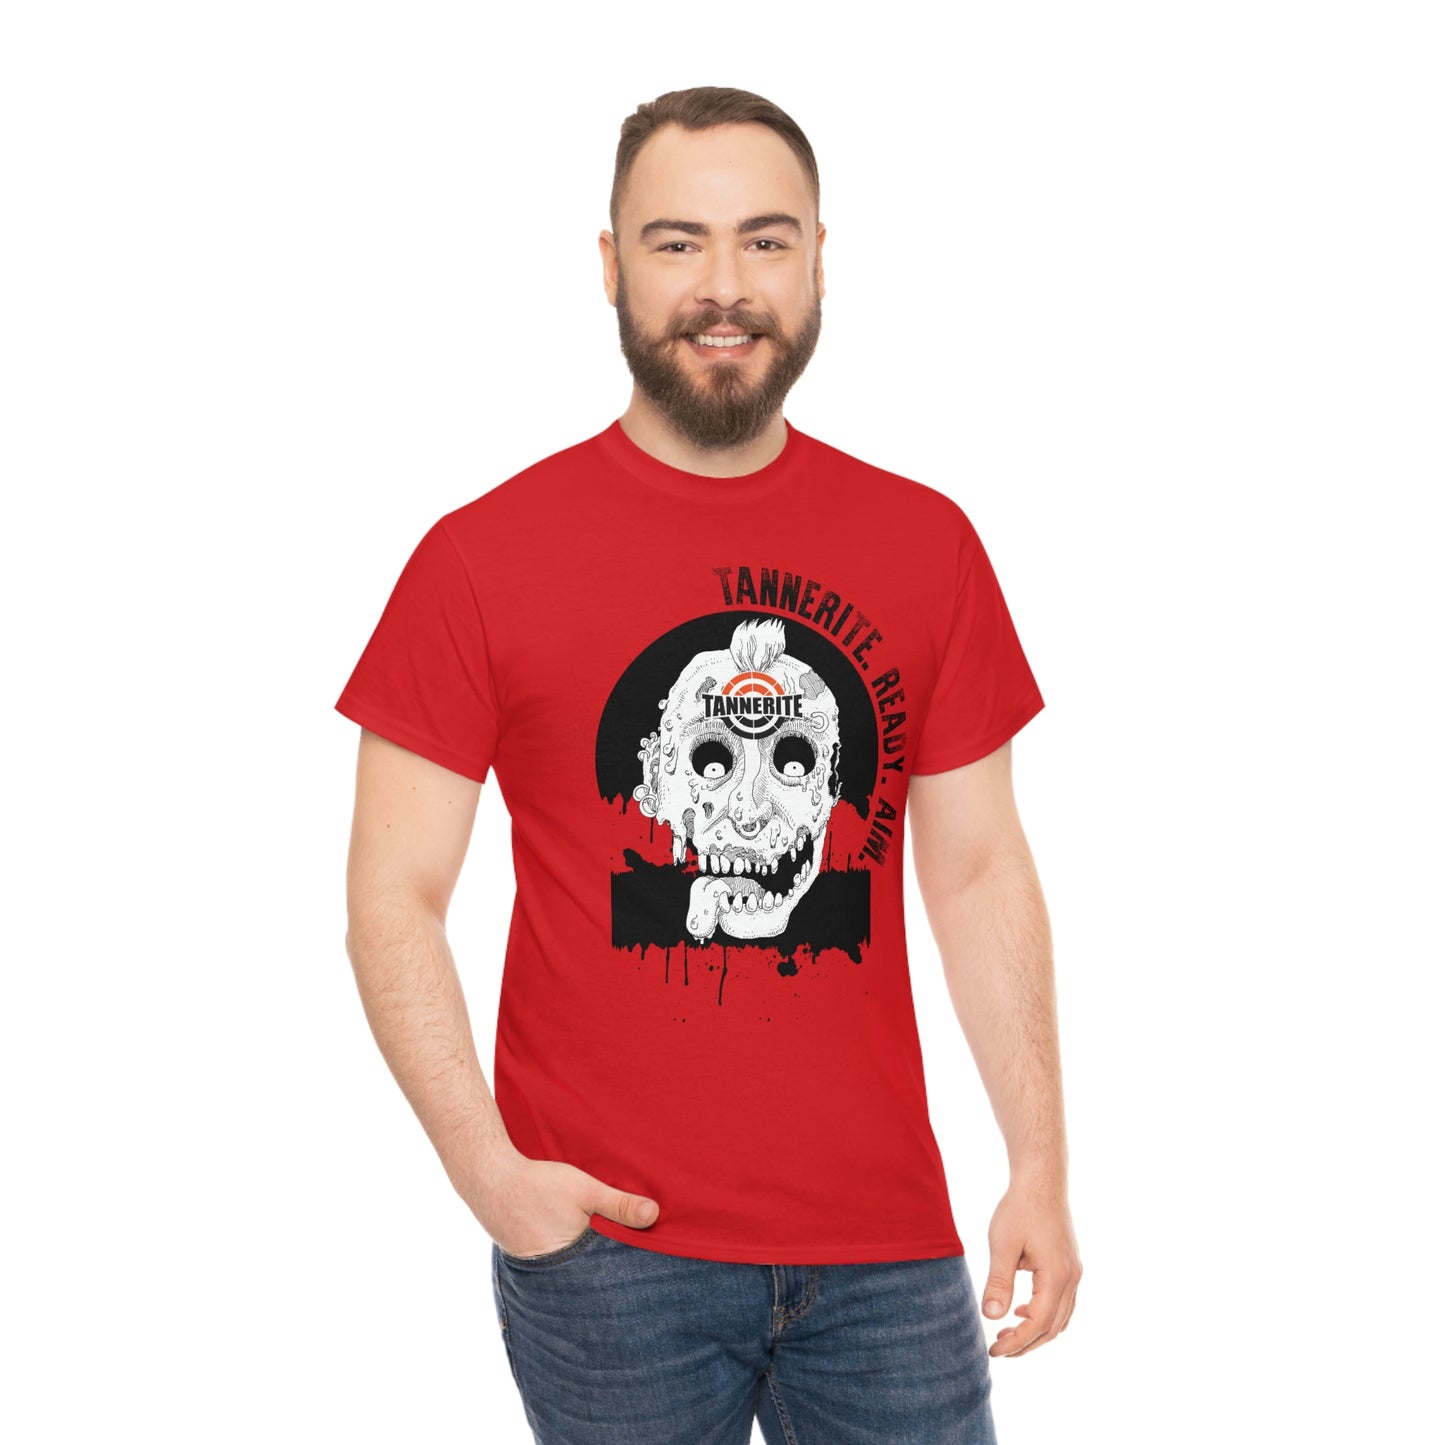 Tannerite ZOMBIE Target skull punk rock skull - are you ready?